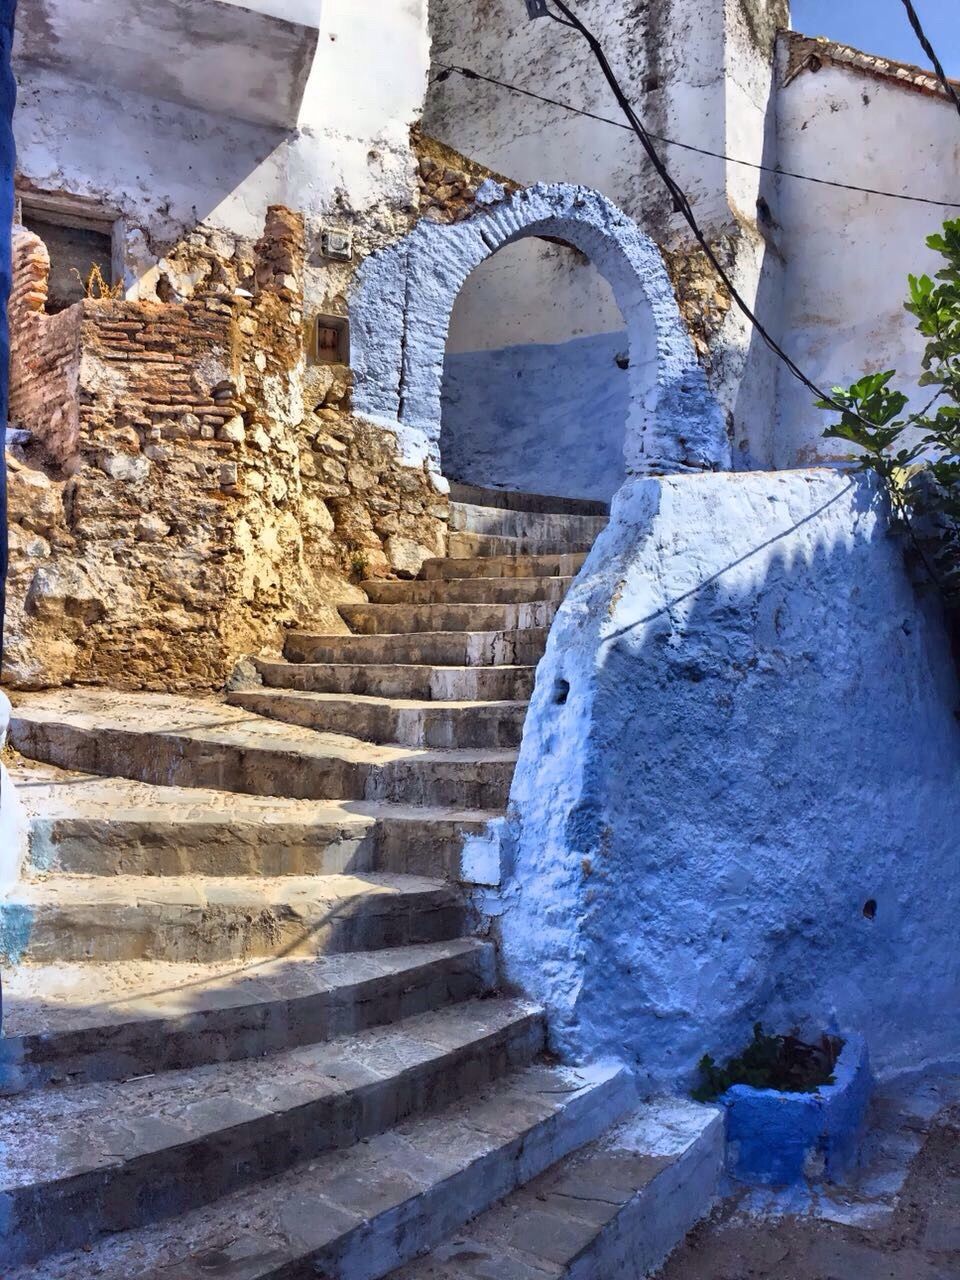 architecture, built structure, steps, building exterior, steps and staircases, wall - building feature, sunlight, staircase, damaged, outdoors, history, day, sky, weathered, stone material, the past, no people